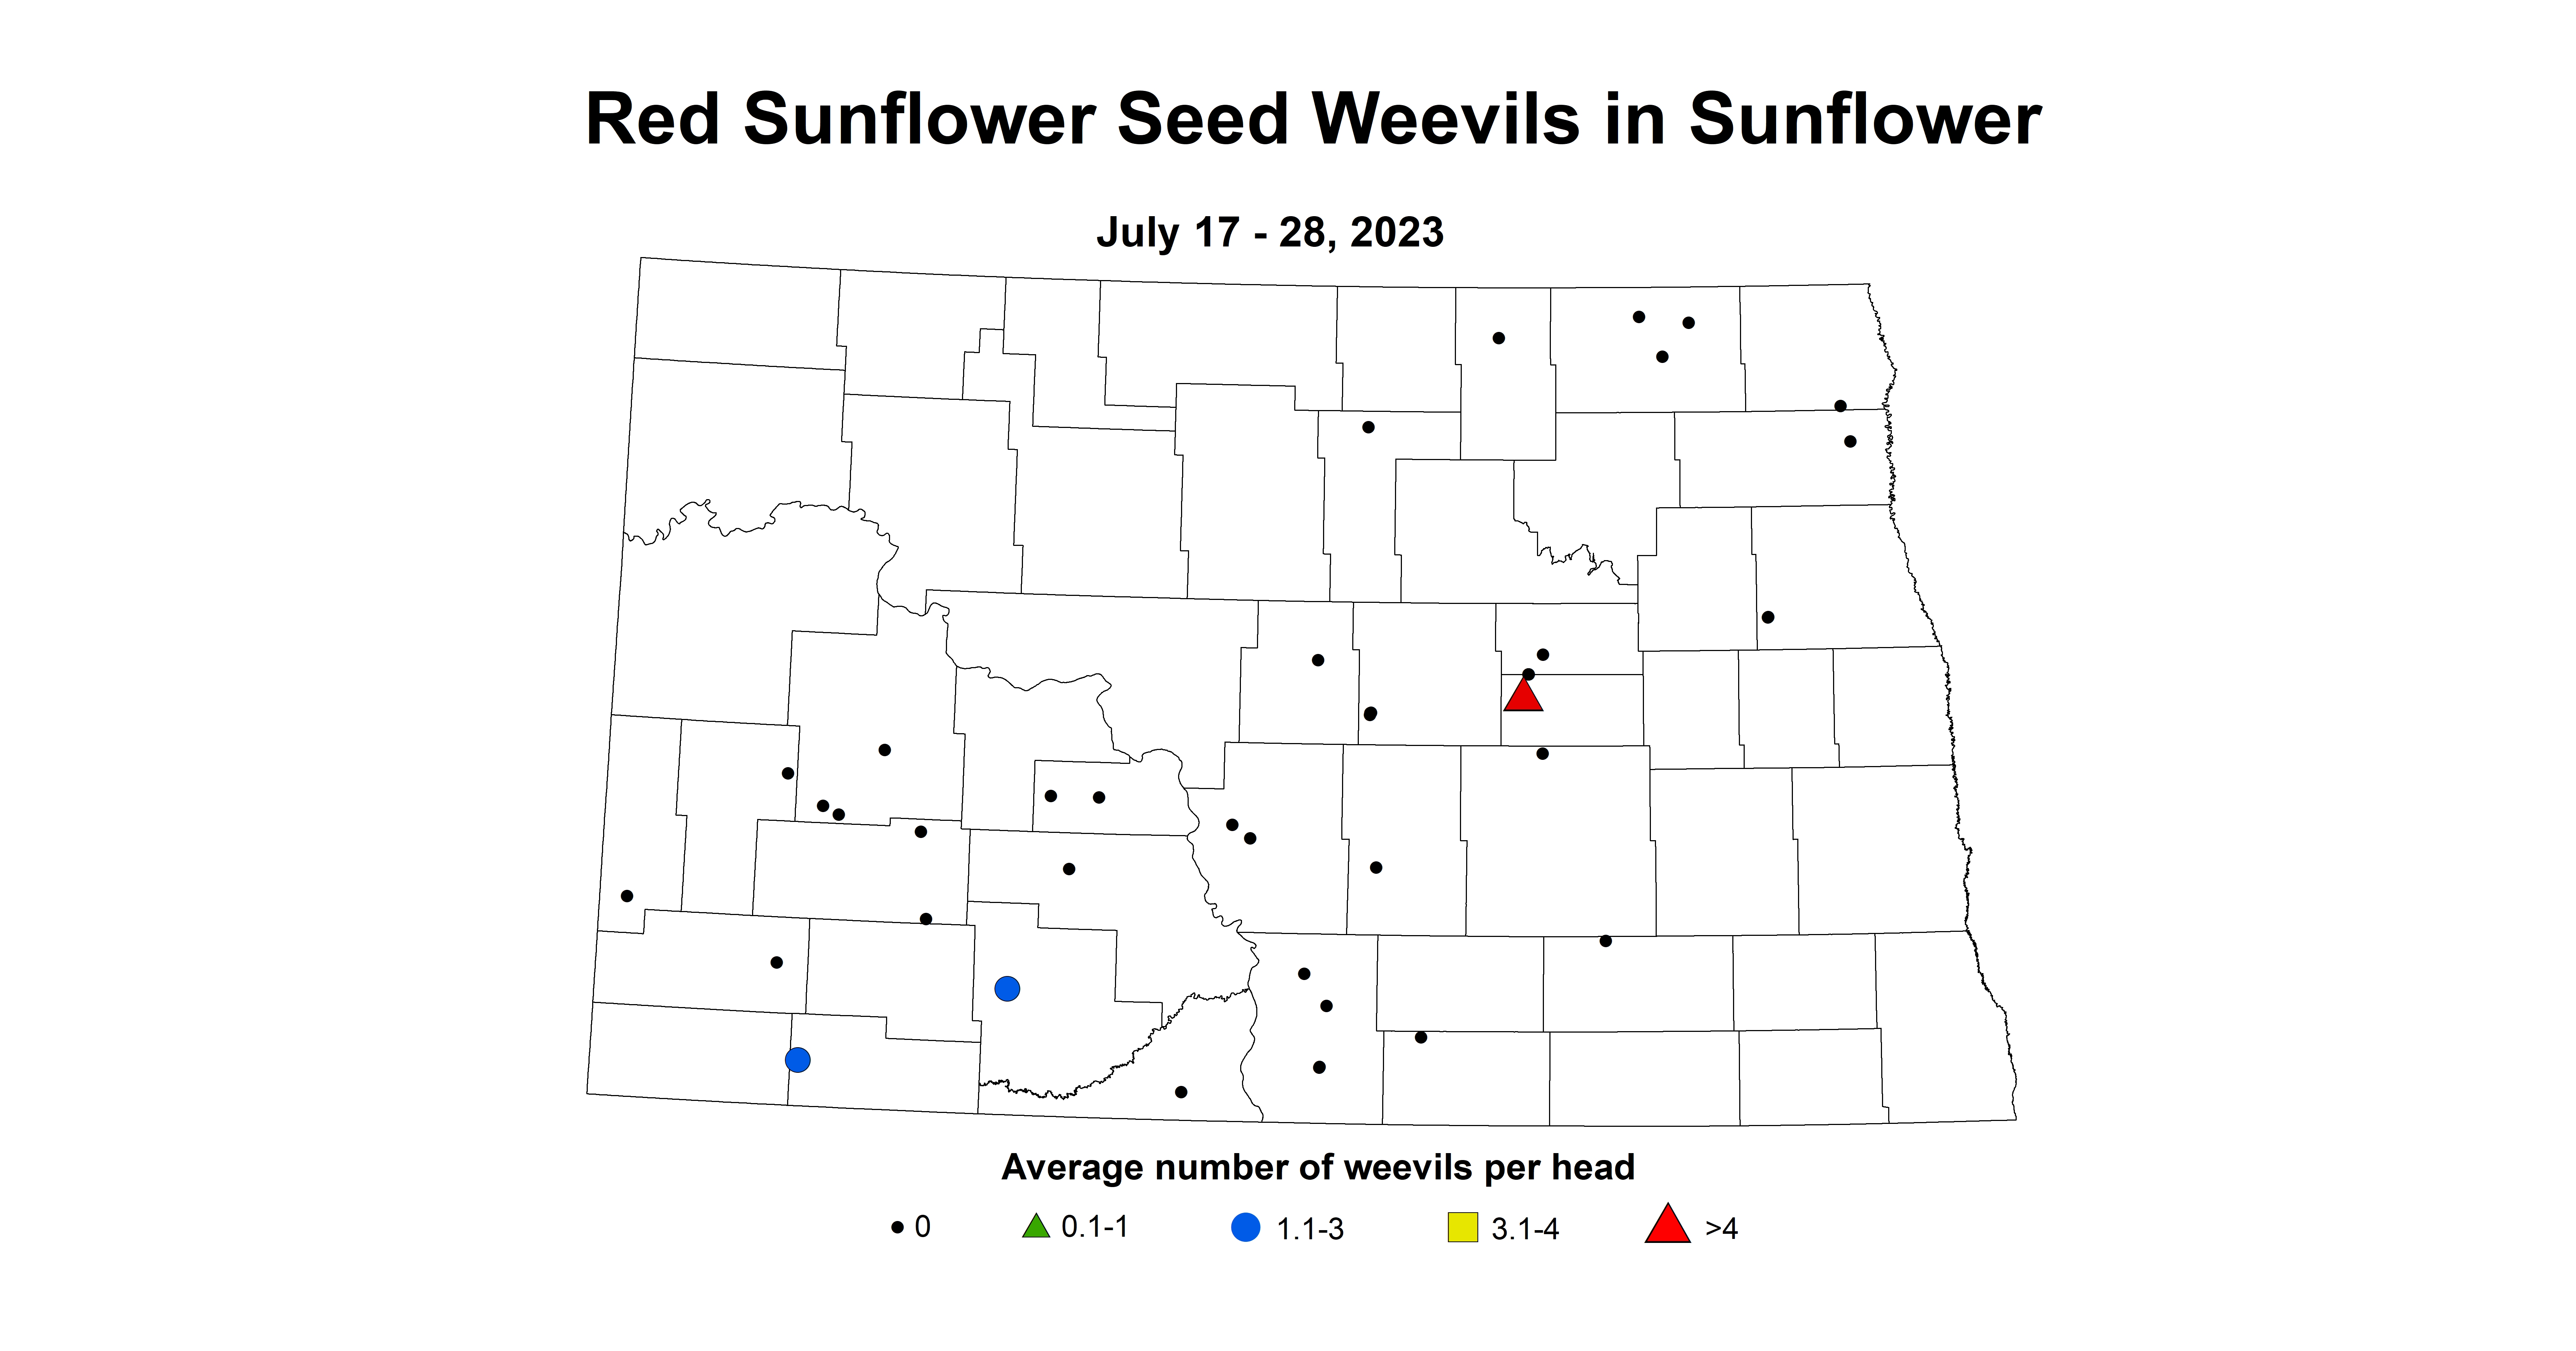 red sunflower seed weevils July 17-28 2023